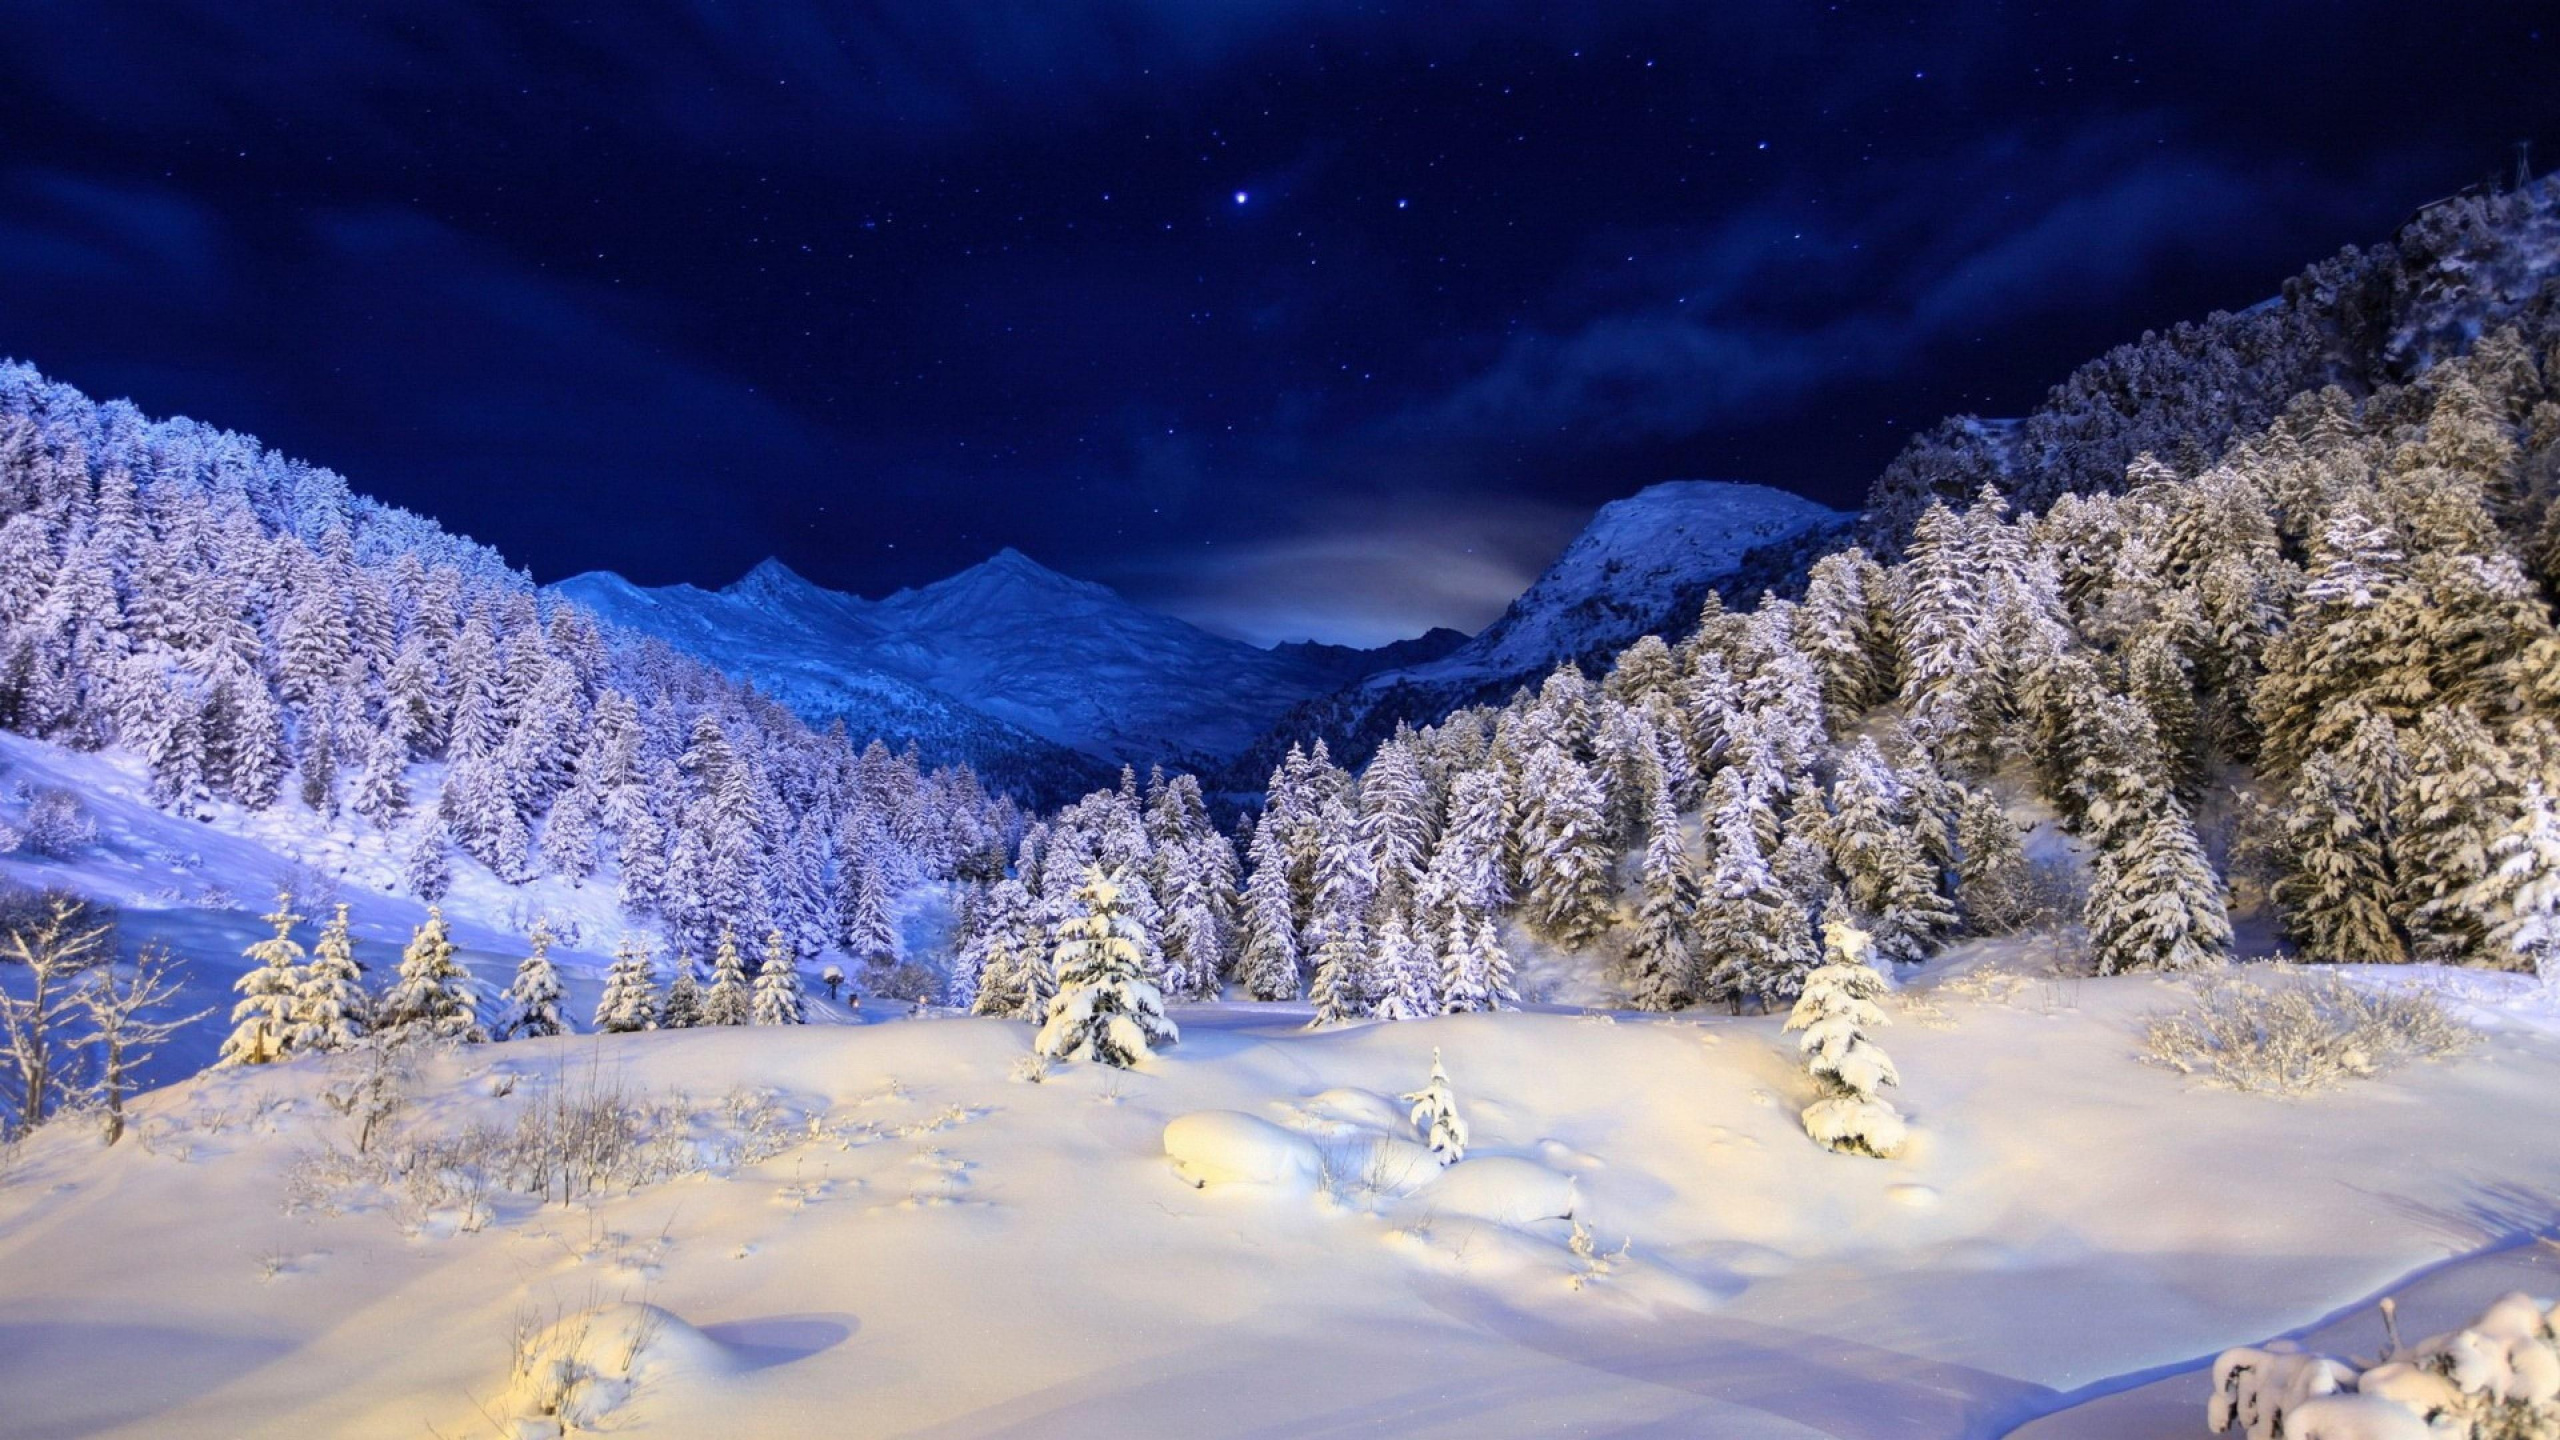 Snow Covered Trees and Mountains During Daytime. Wallpaper in 2560x1440 Resolution